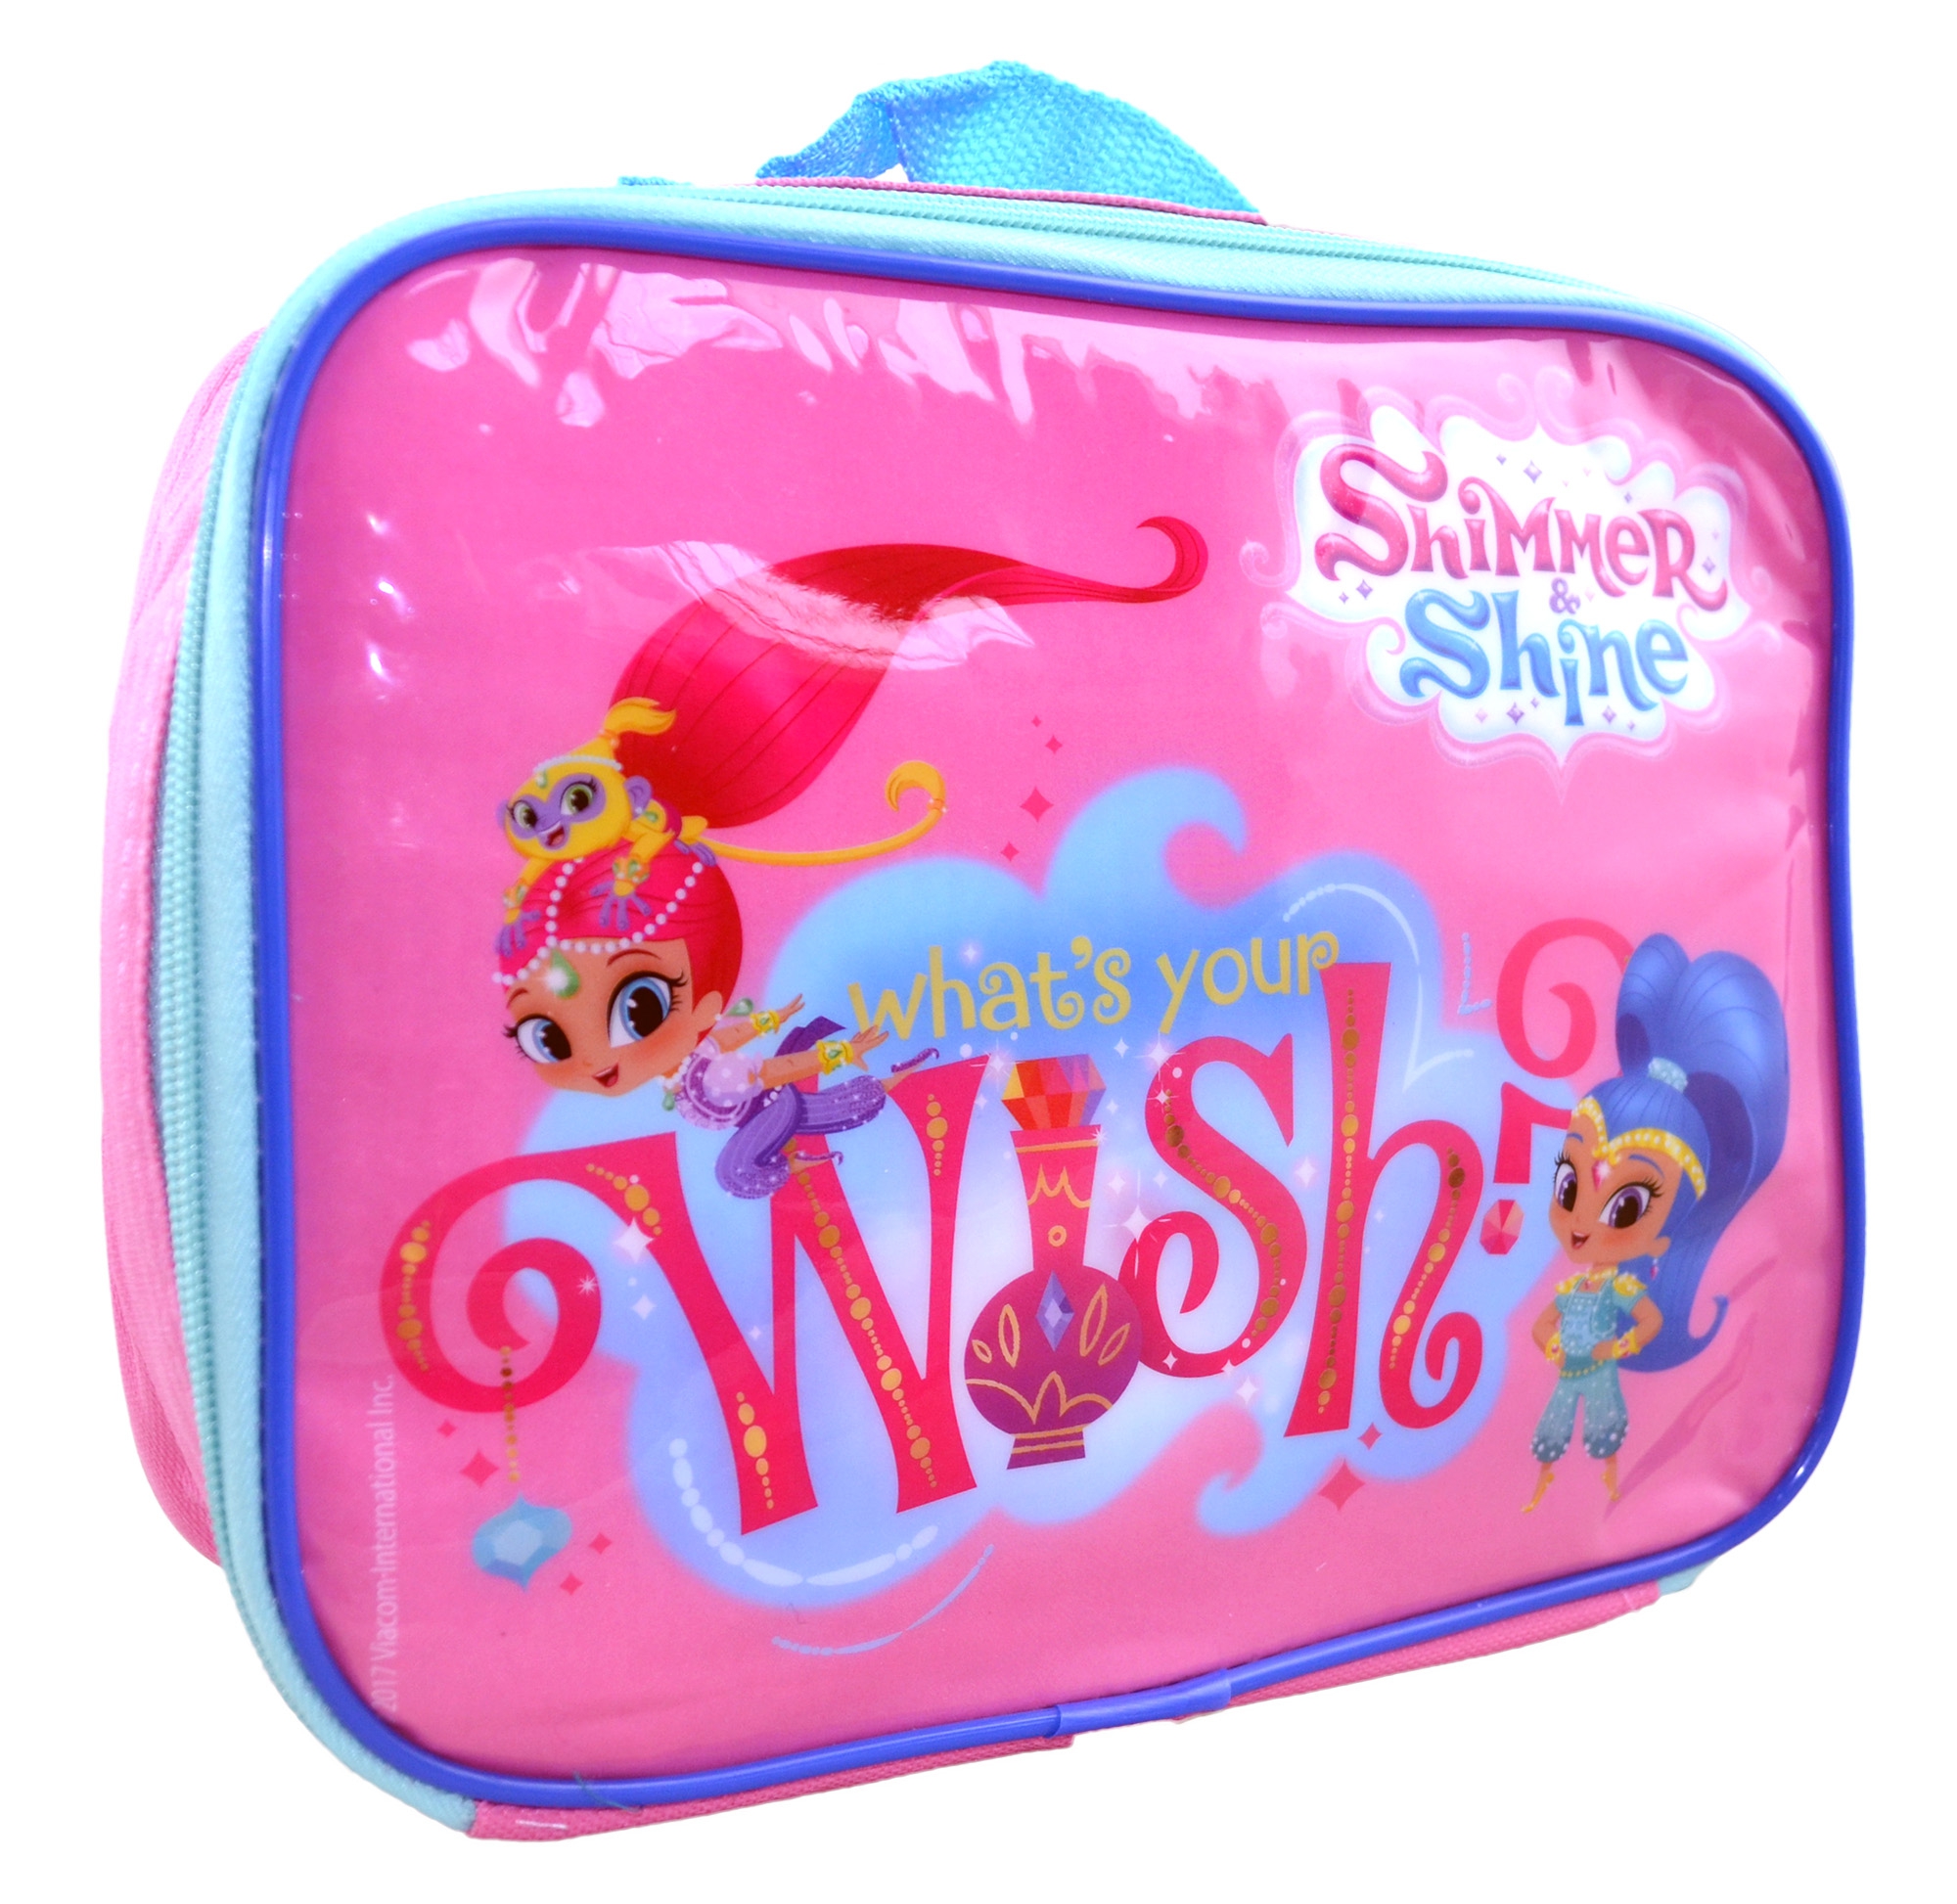 Shimmer & Shine 'What's Your Wish' School Rectangle Lunch Bag